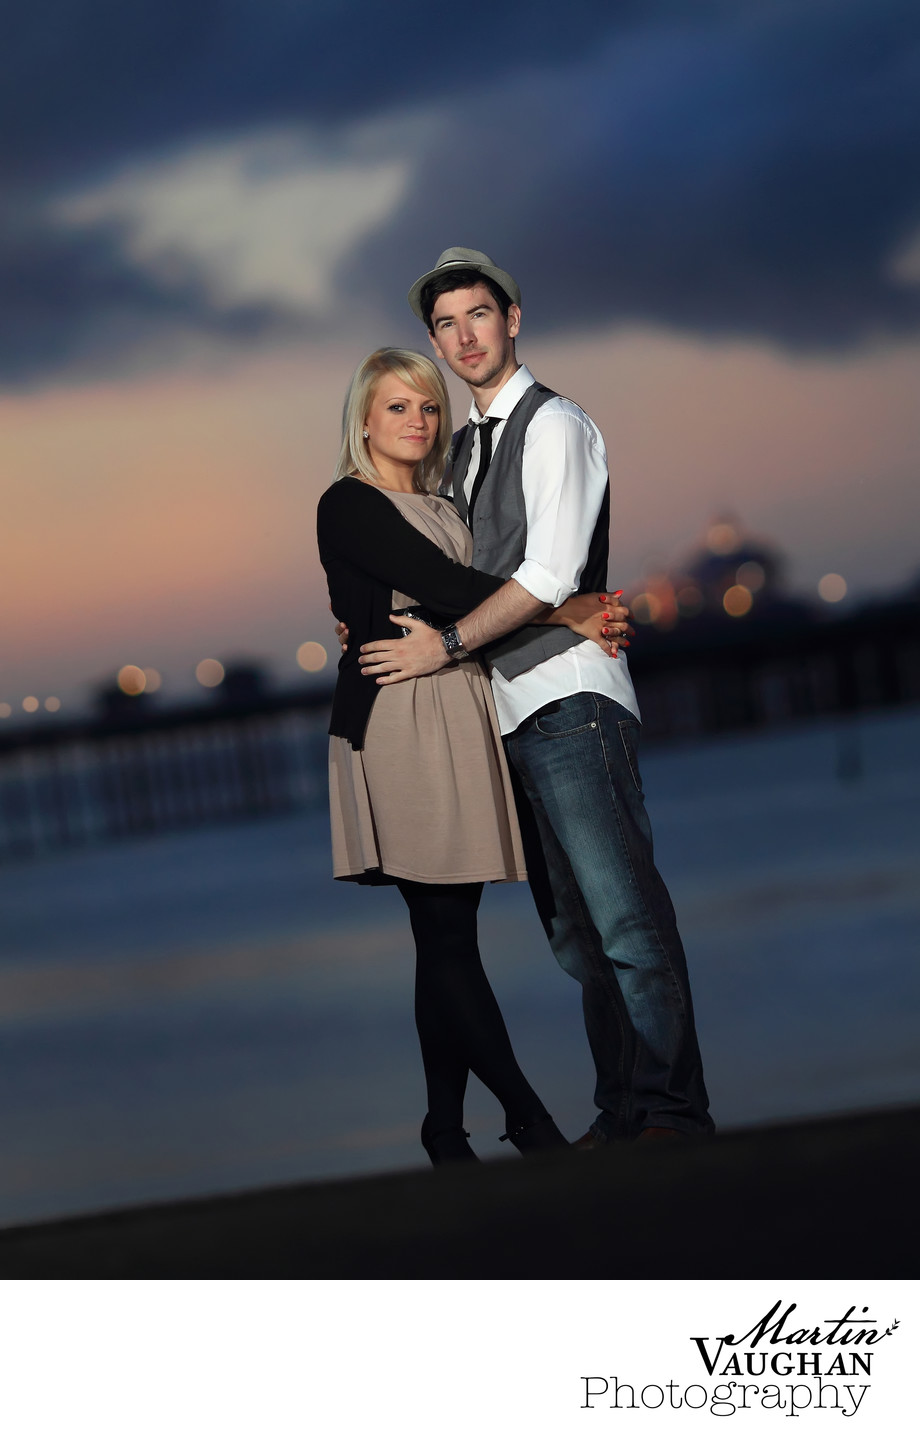 Top enagagement photographer in North Wales